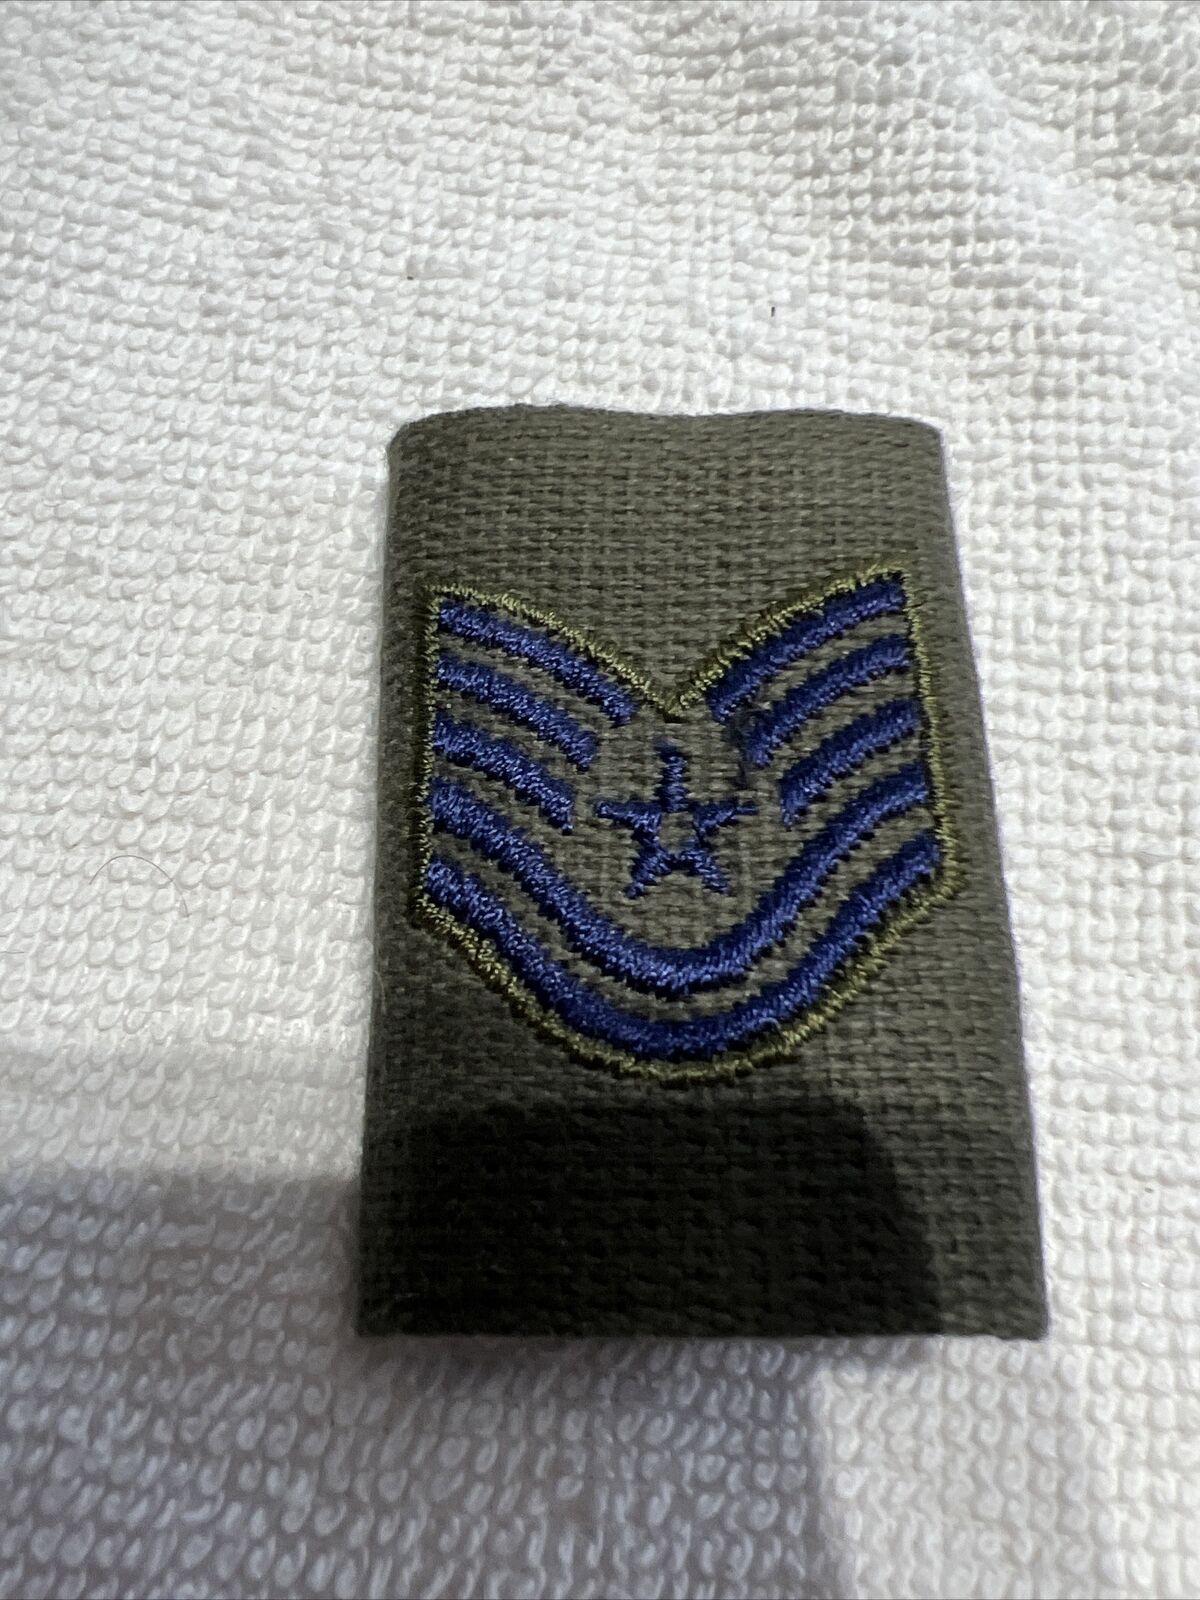 US Air Force E-6 JACKET RANK PATCH. Lot 187